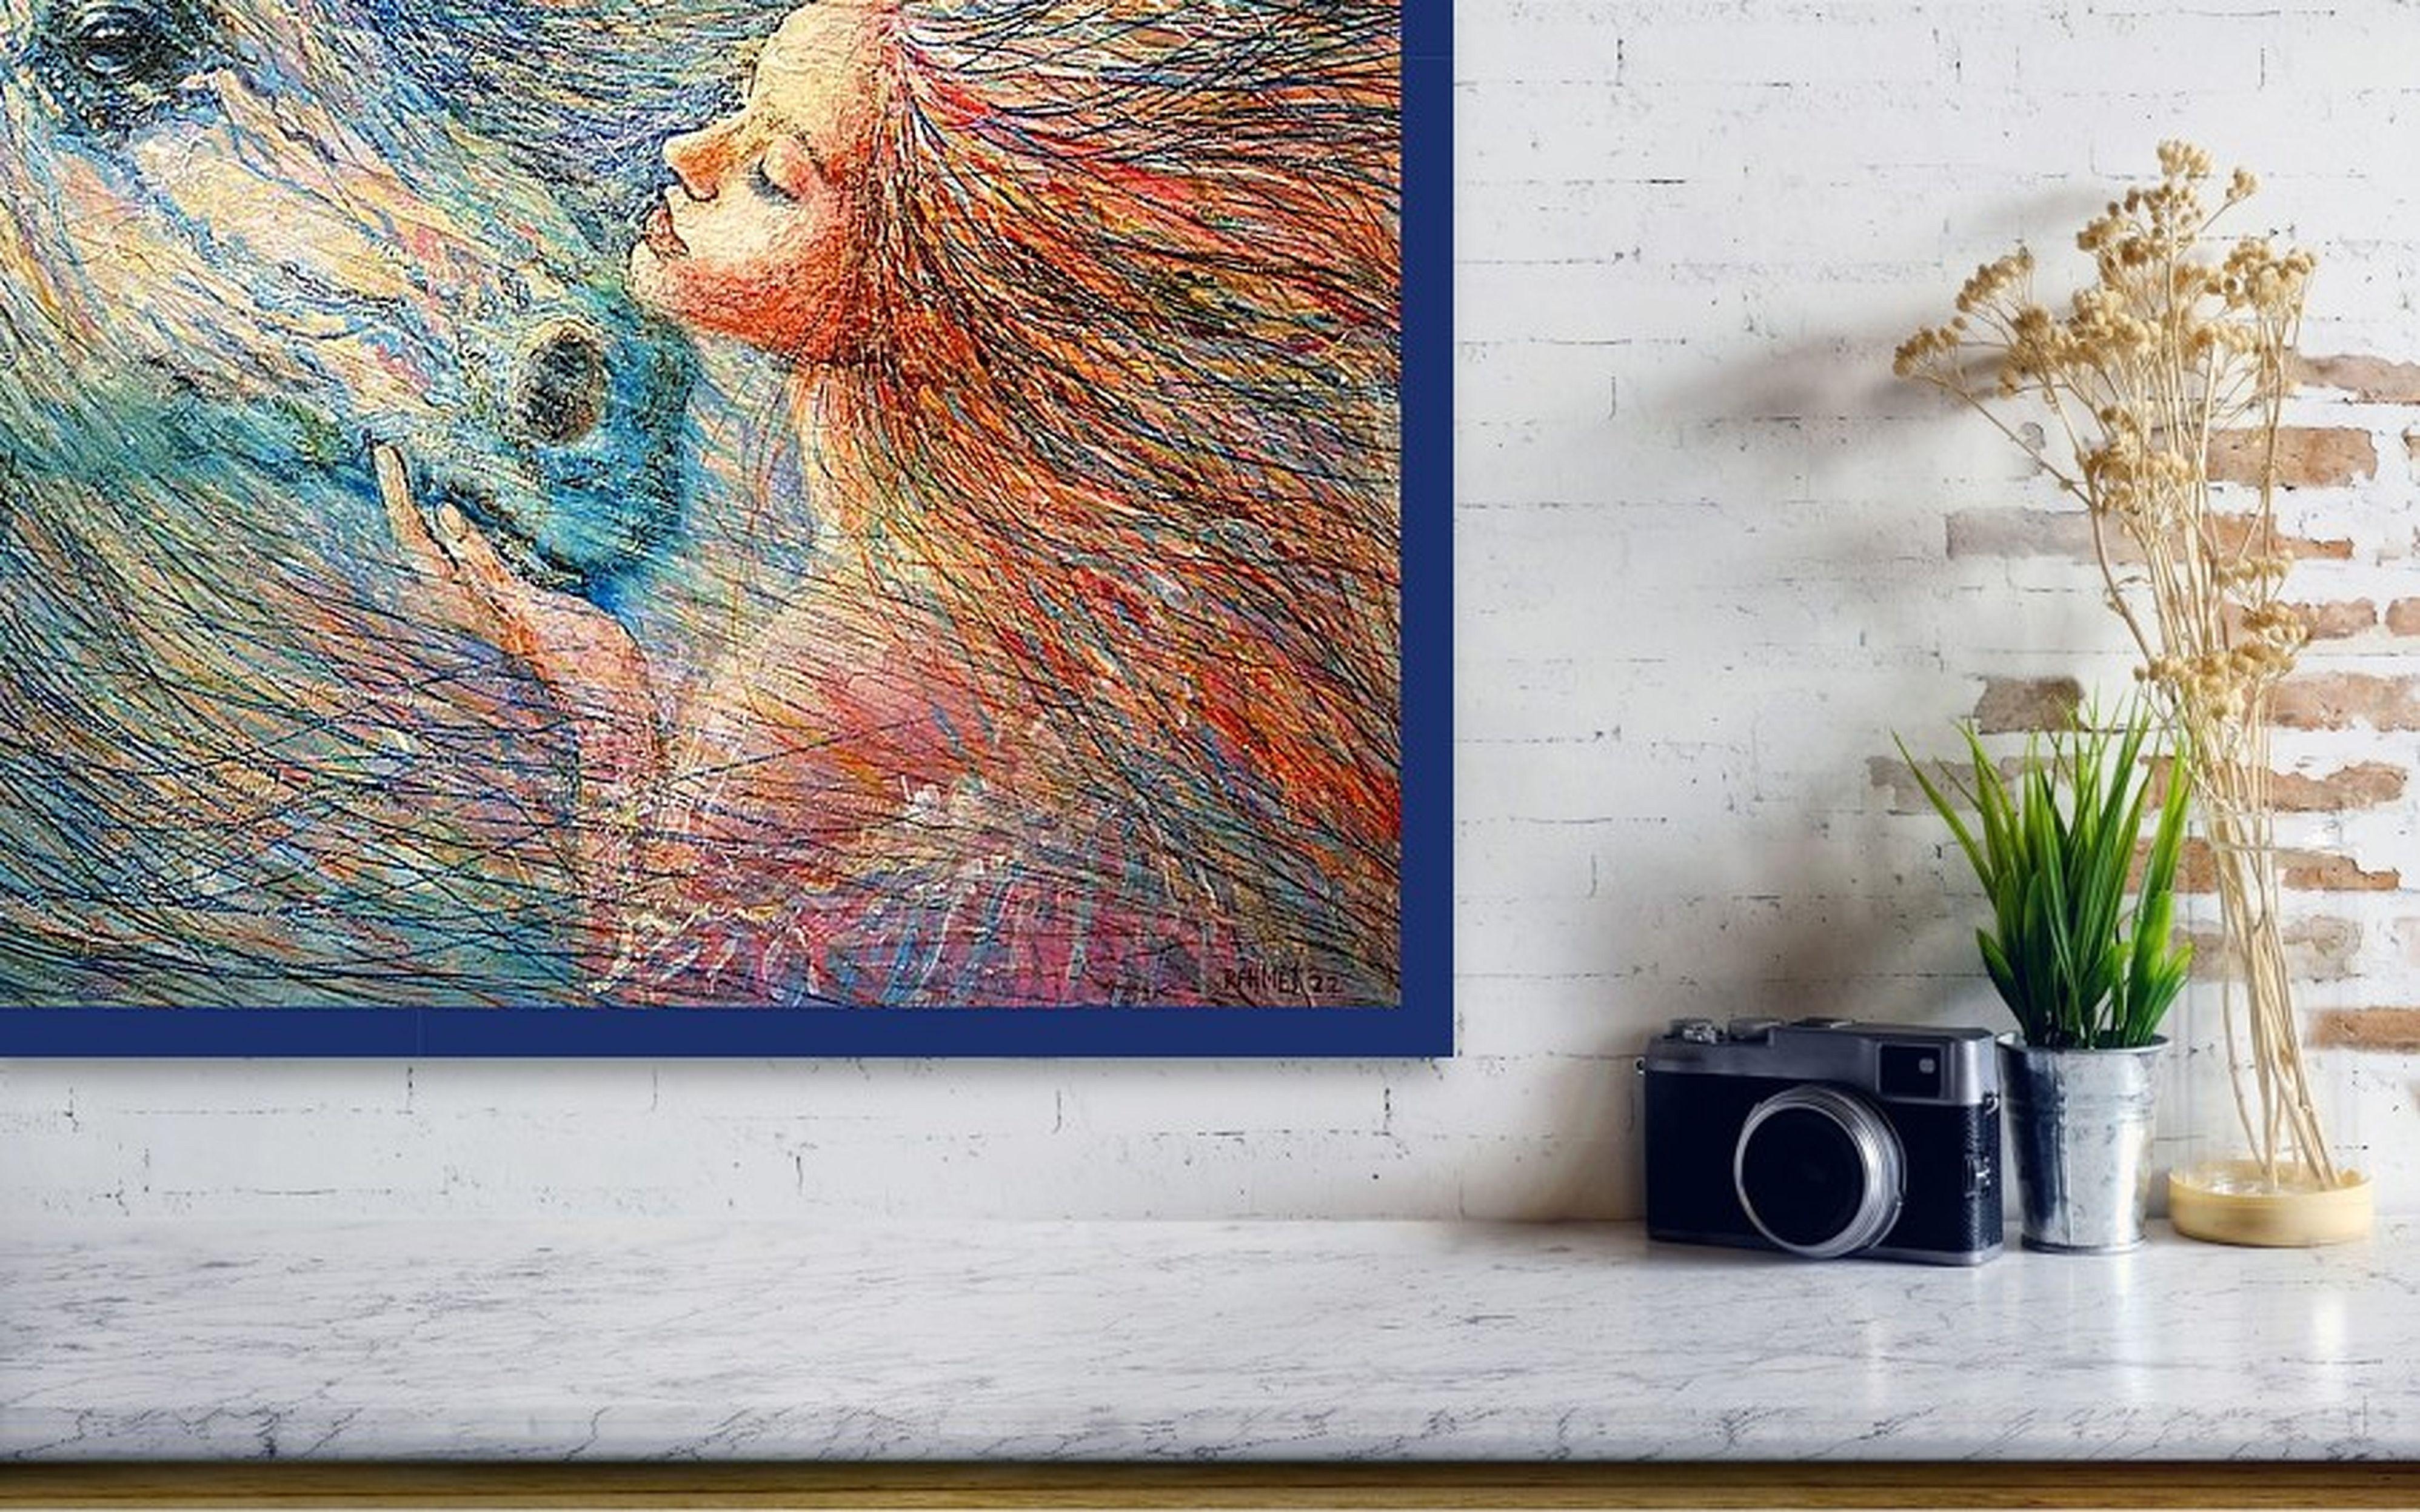 In this vibrant fusion of impressionism and realism touched by pop art flair, I blended acrylics, oils, and pastels to capture the intimate bond between human and animal. The passionate reds and dynamic strokes convey a deep, emotional connection,